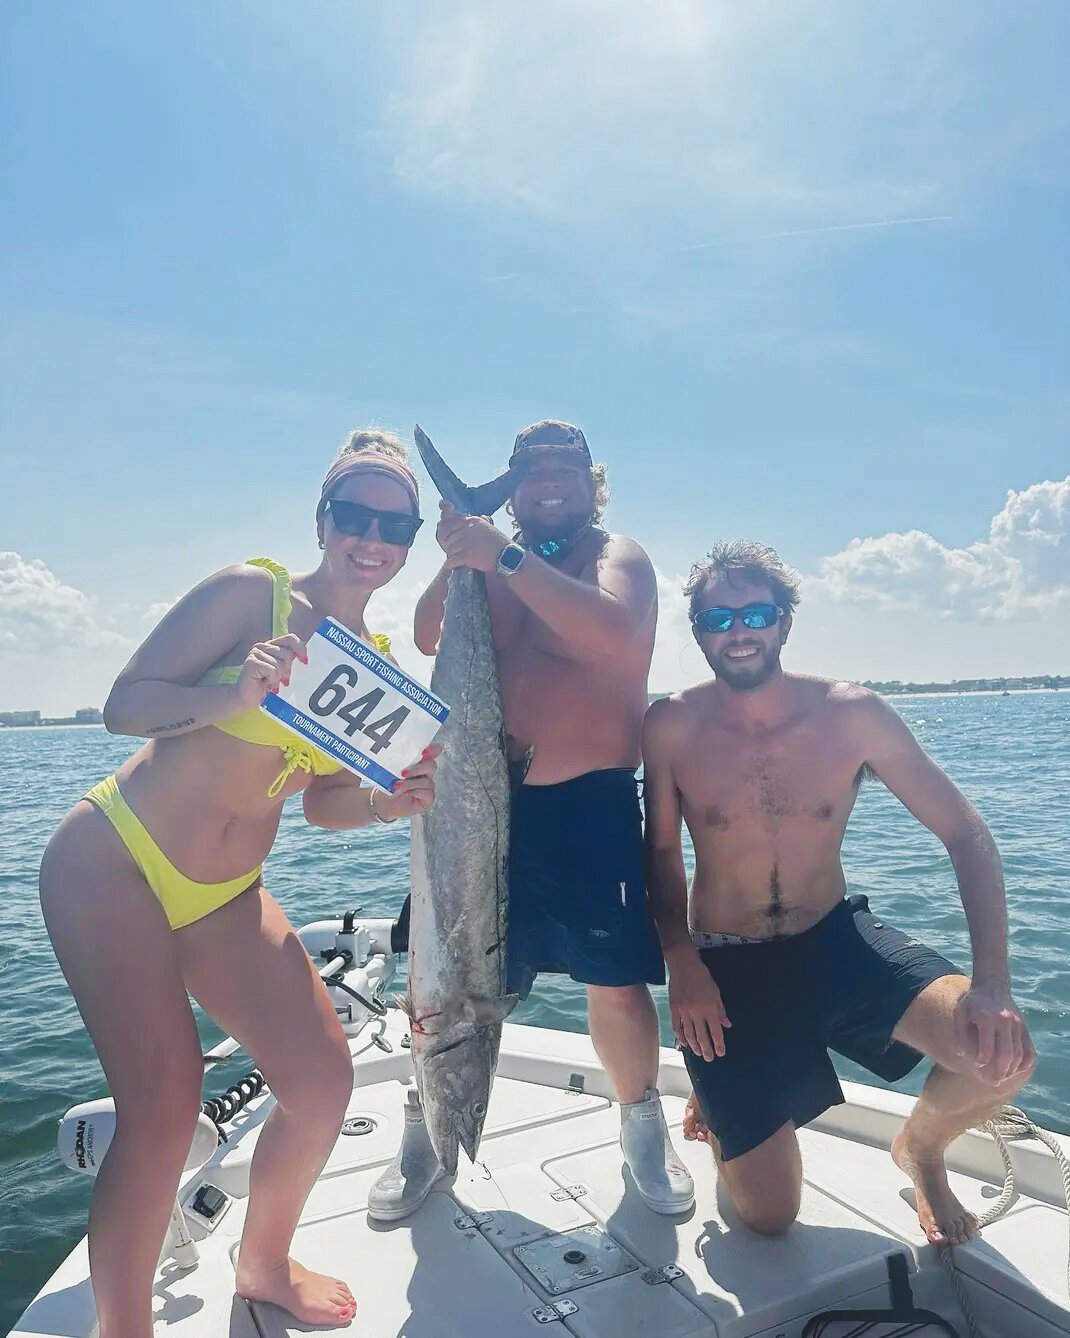 Laura Baylor shows off her first-place Lady Angler 34 lb kingfish caught at the Nassau sport fishing association 40th annual Kingfish tournament. Baylor, here with Robert Vogt, former St John’s Country Day Superstar football player, caught the fish on a downrigger using a ribbon fish.